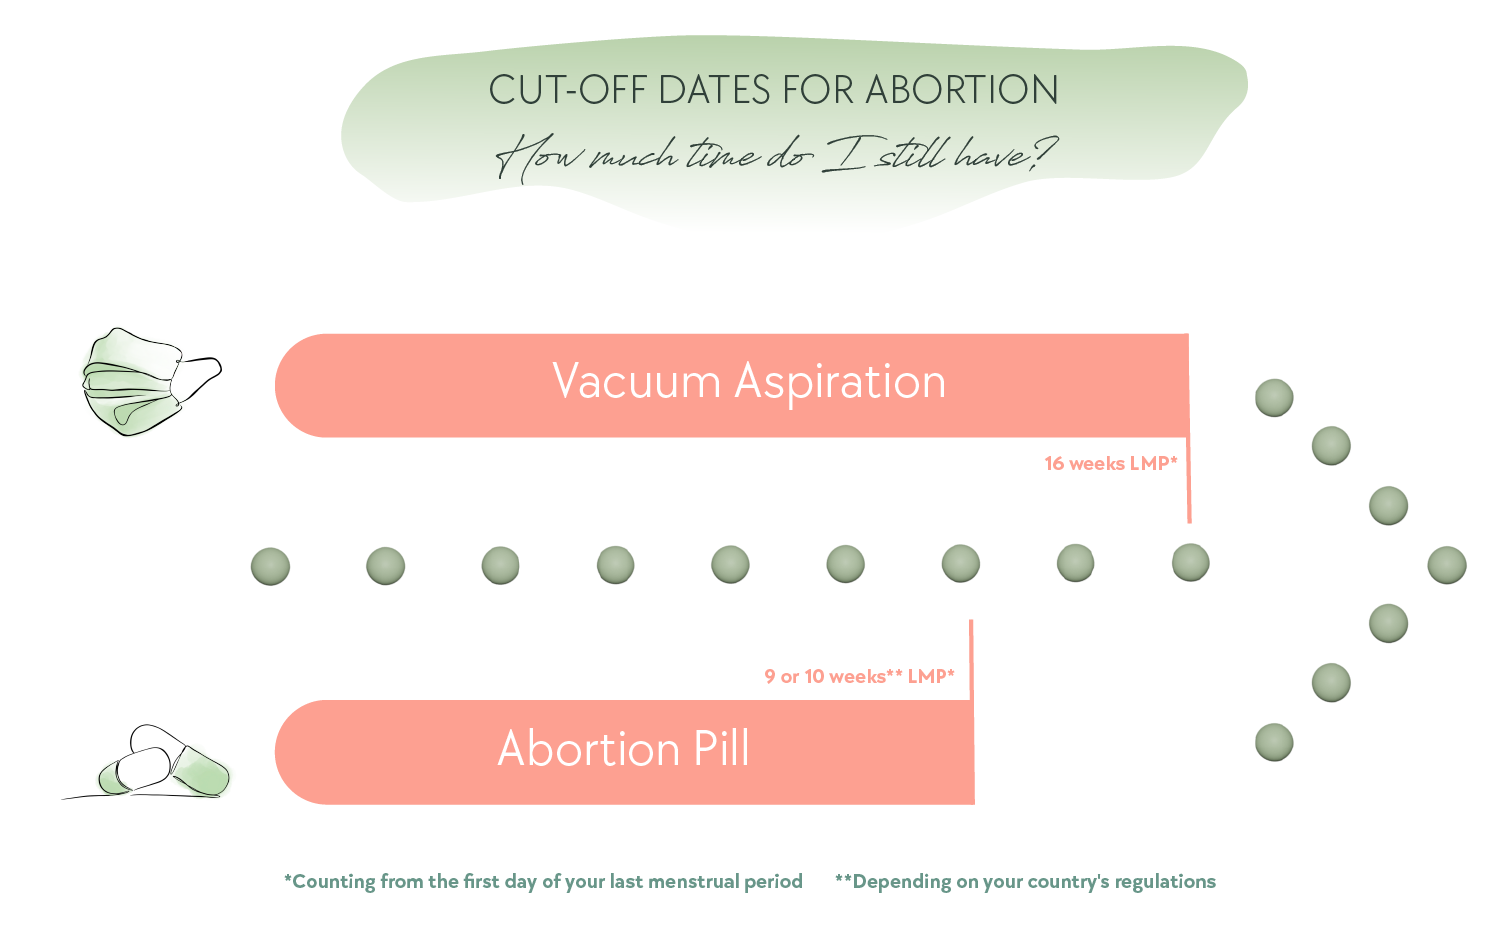 Cut-off dates for abortion